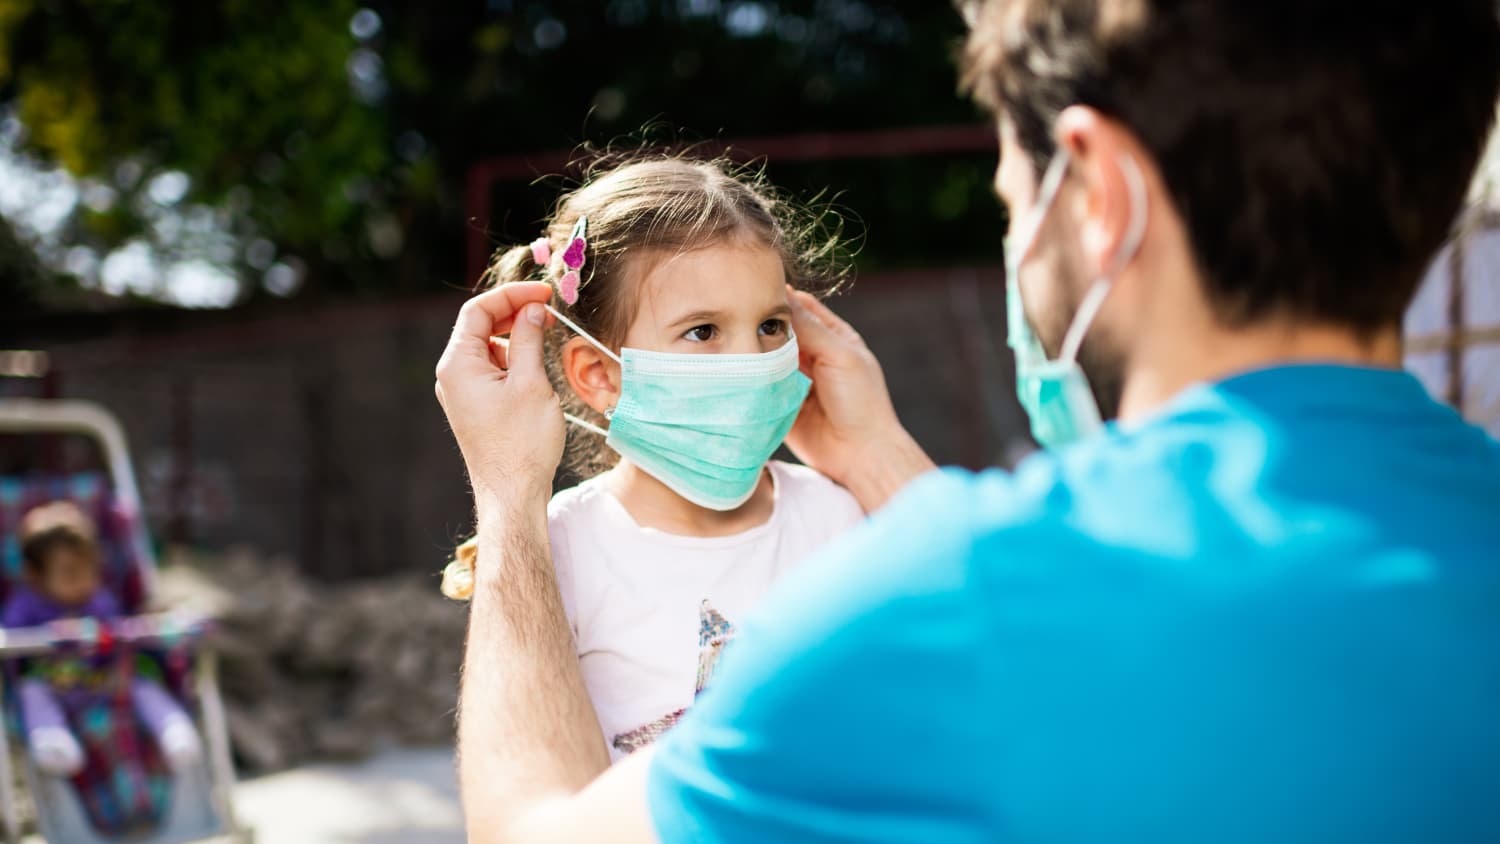 Common Respiratory Infections May Have Protected Children from Covid-19, Study Suggests